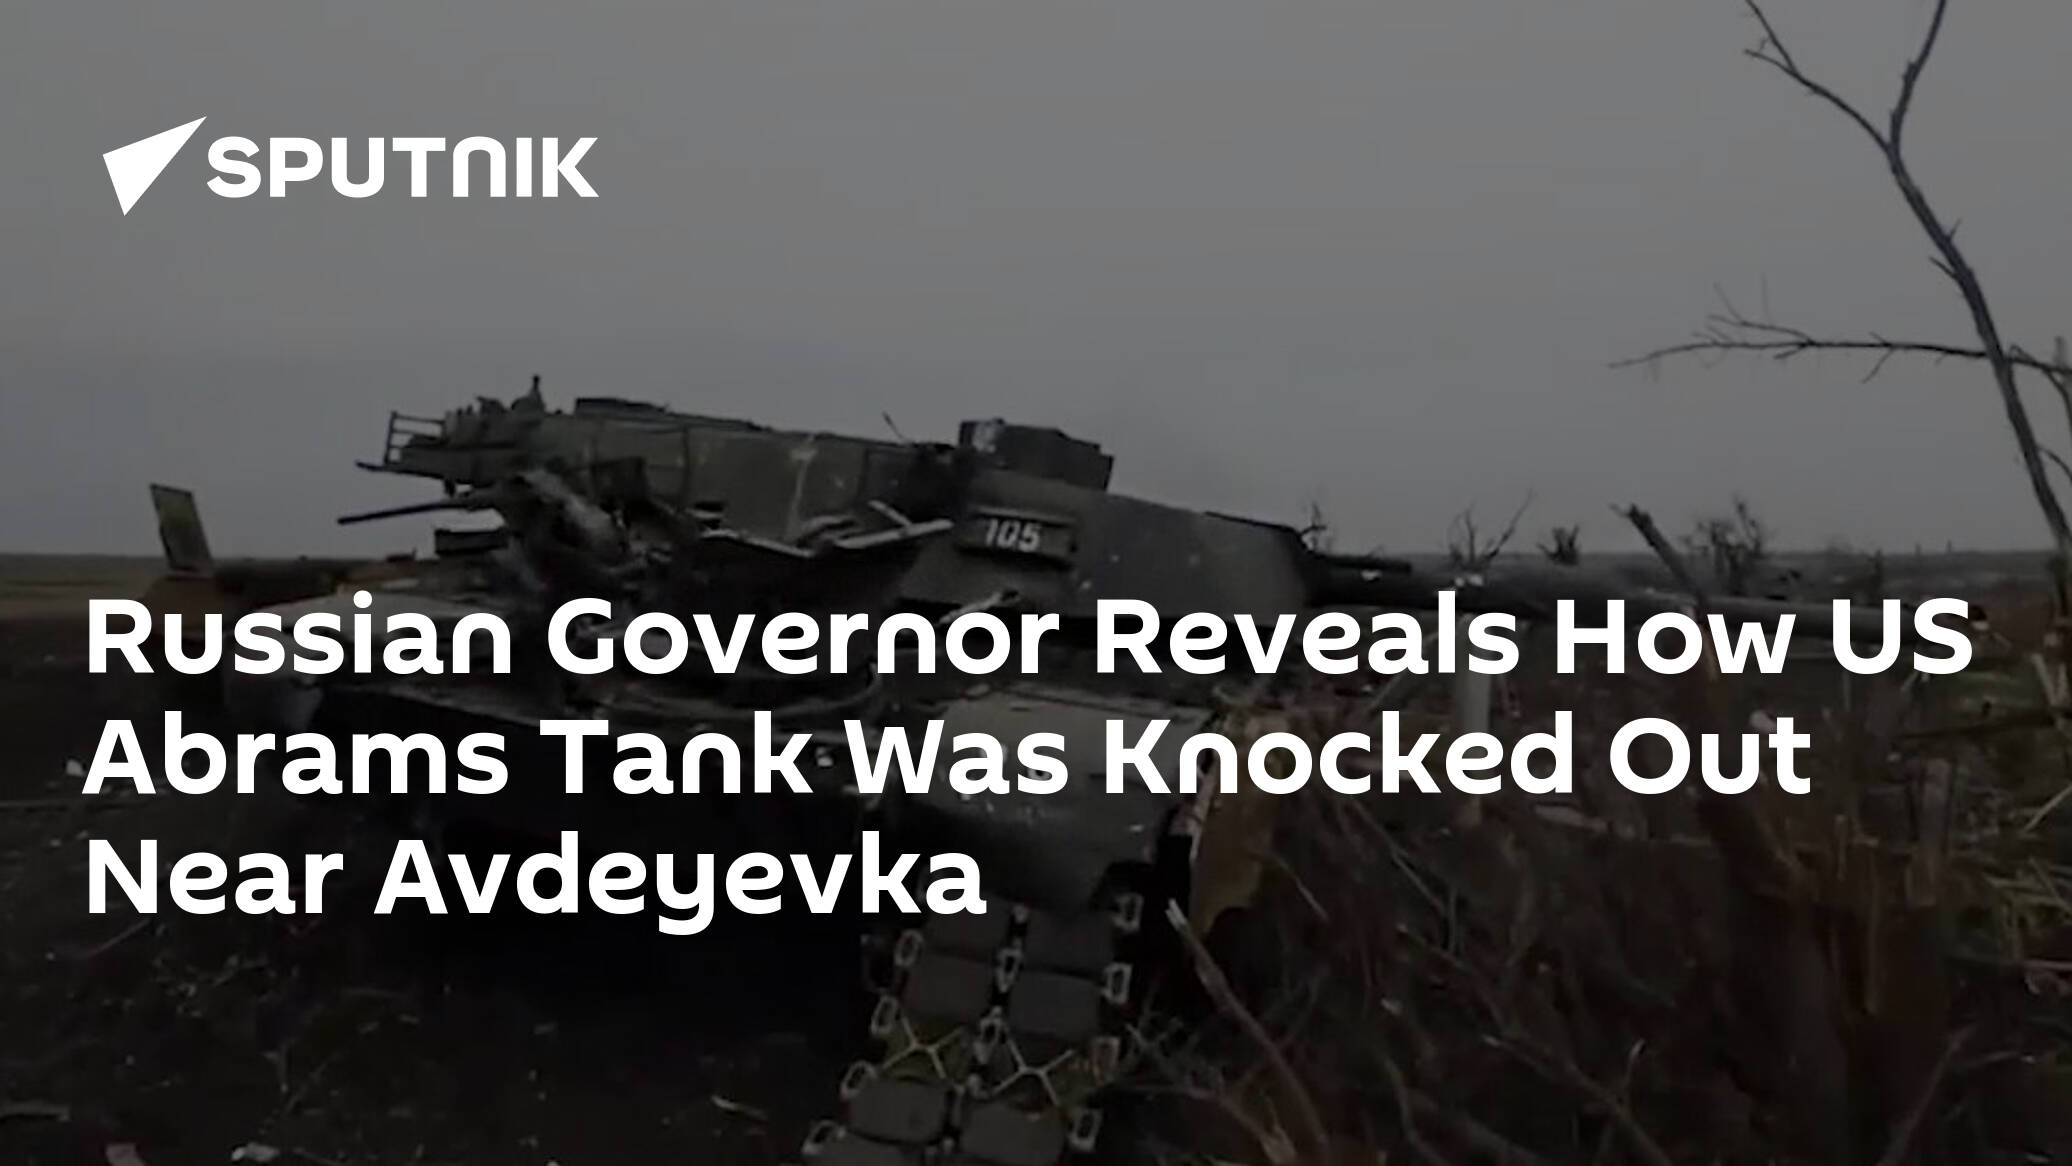 Russian Governor Reveals How US Abrams Tank Was Knocked Out